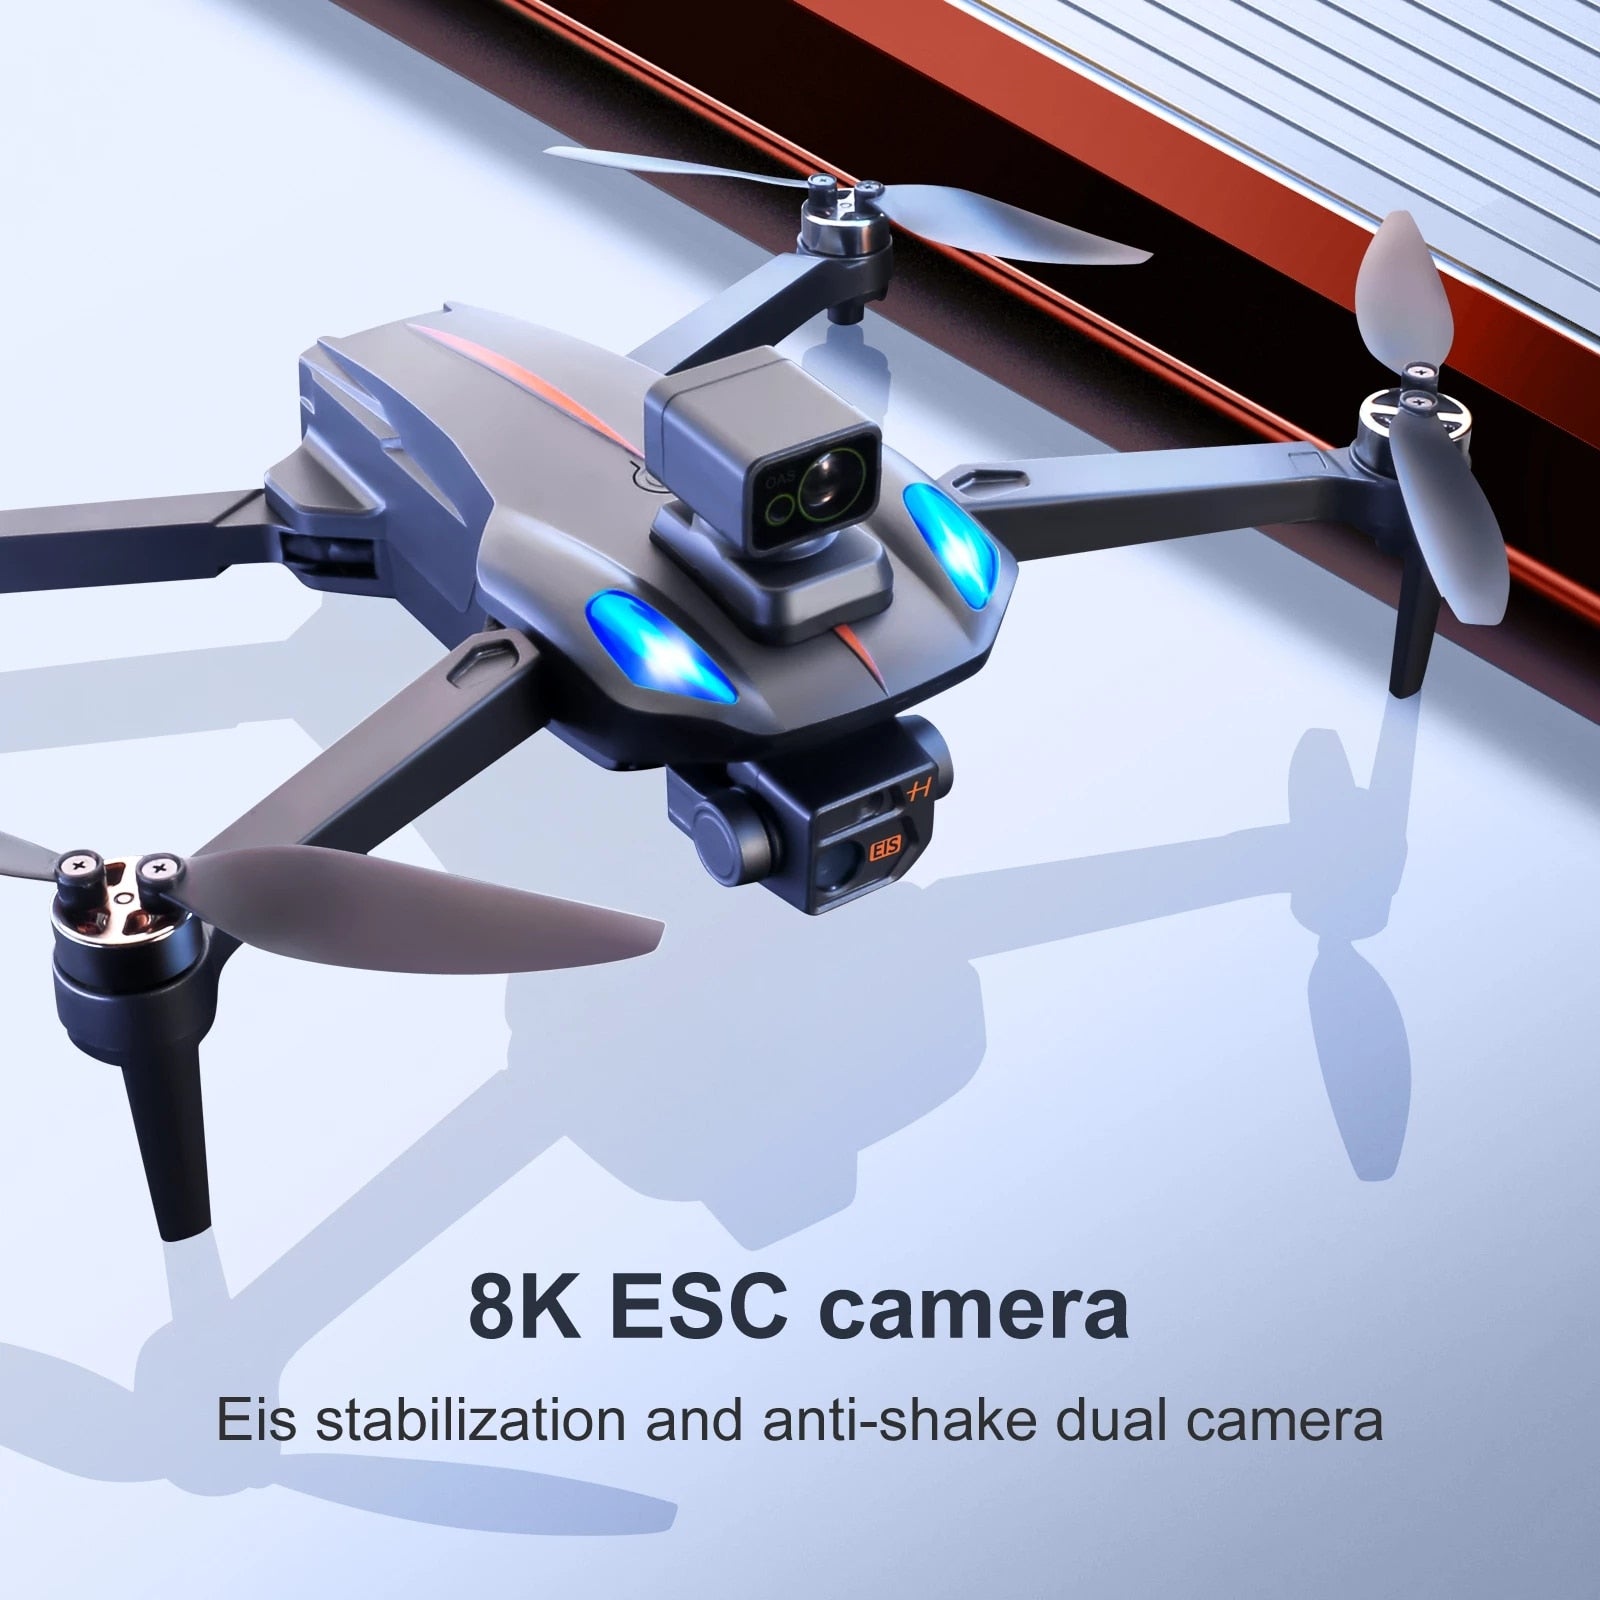 New 1.2 K911 MAX GPS Drone 8K Professional Dual HD Camera FPV 1200Km Aerial Photography Brushless Motor Foldable Quadcopter Toy